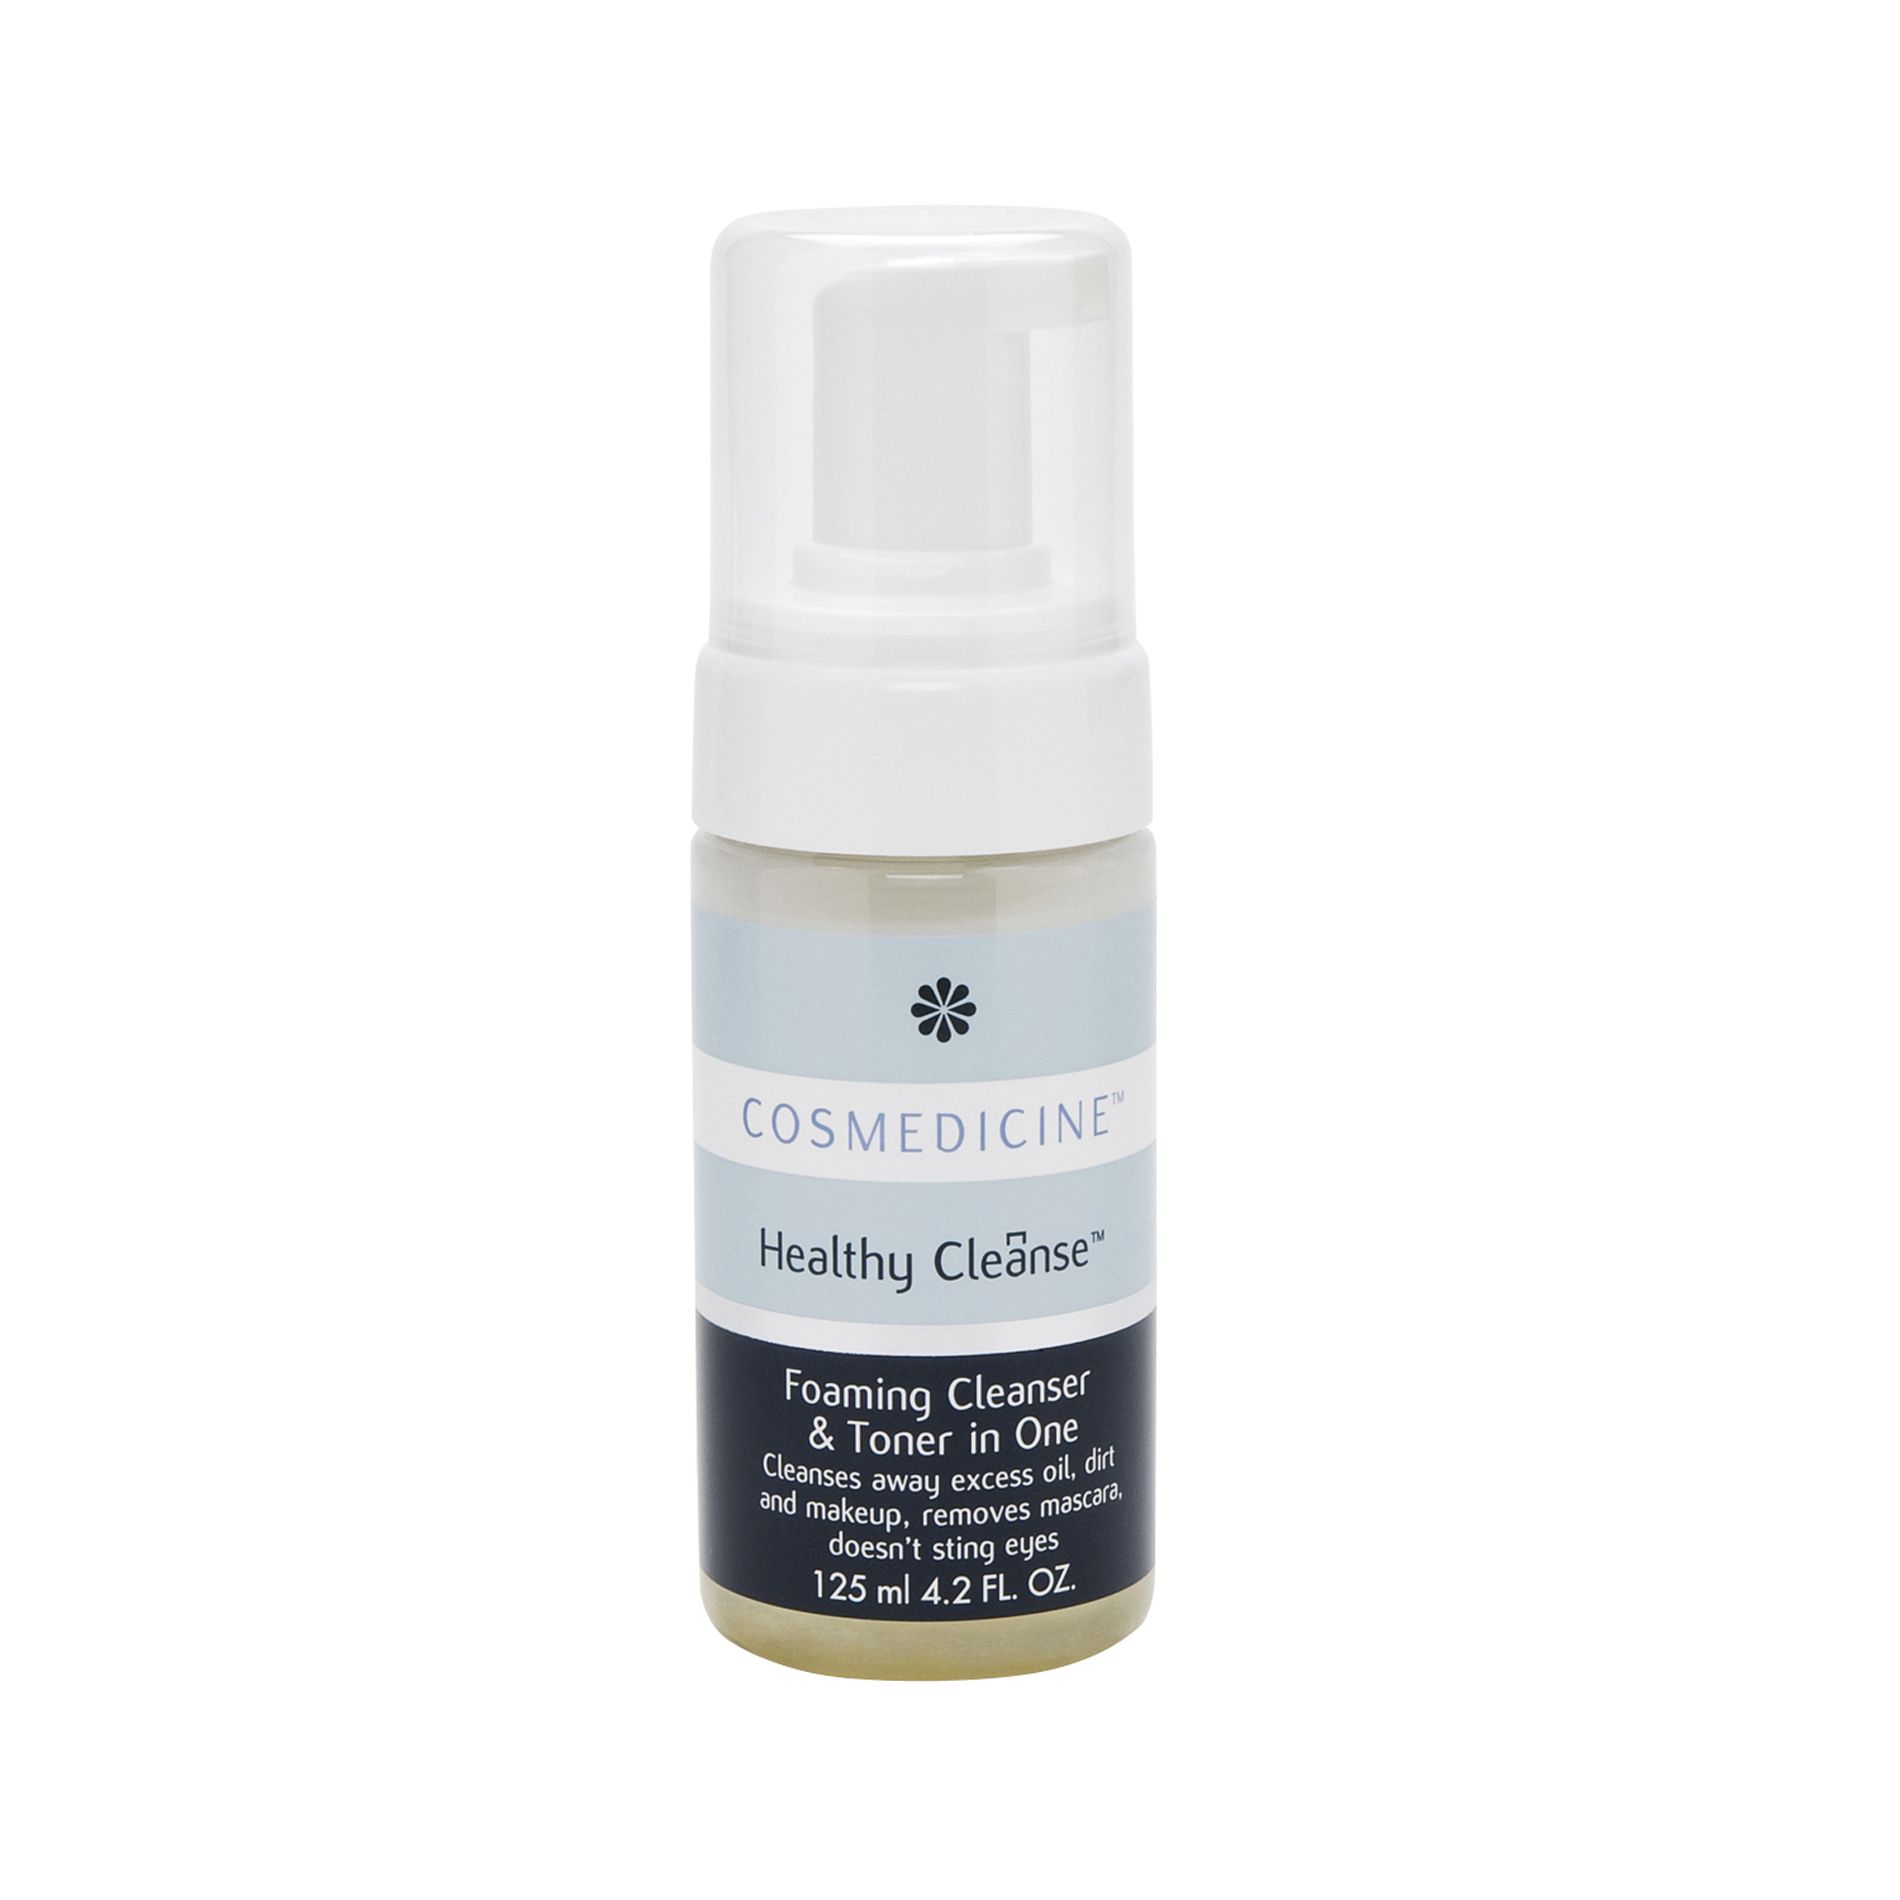 Cosmedicine Healthy Cleanse Foaming Cleanser & Toner in One